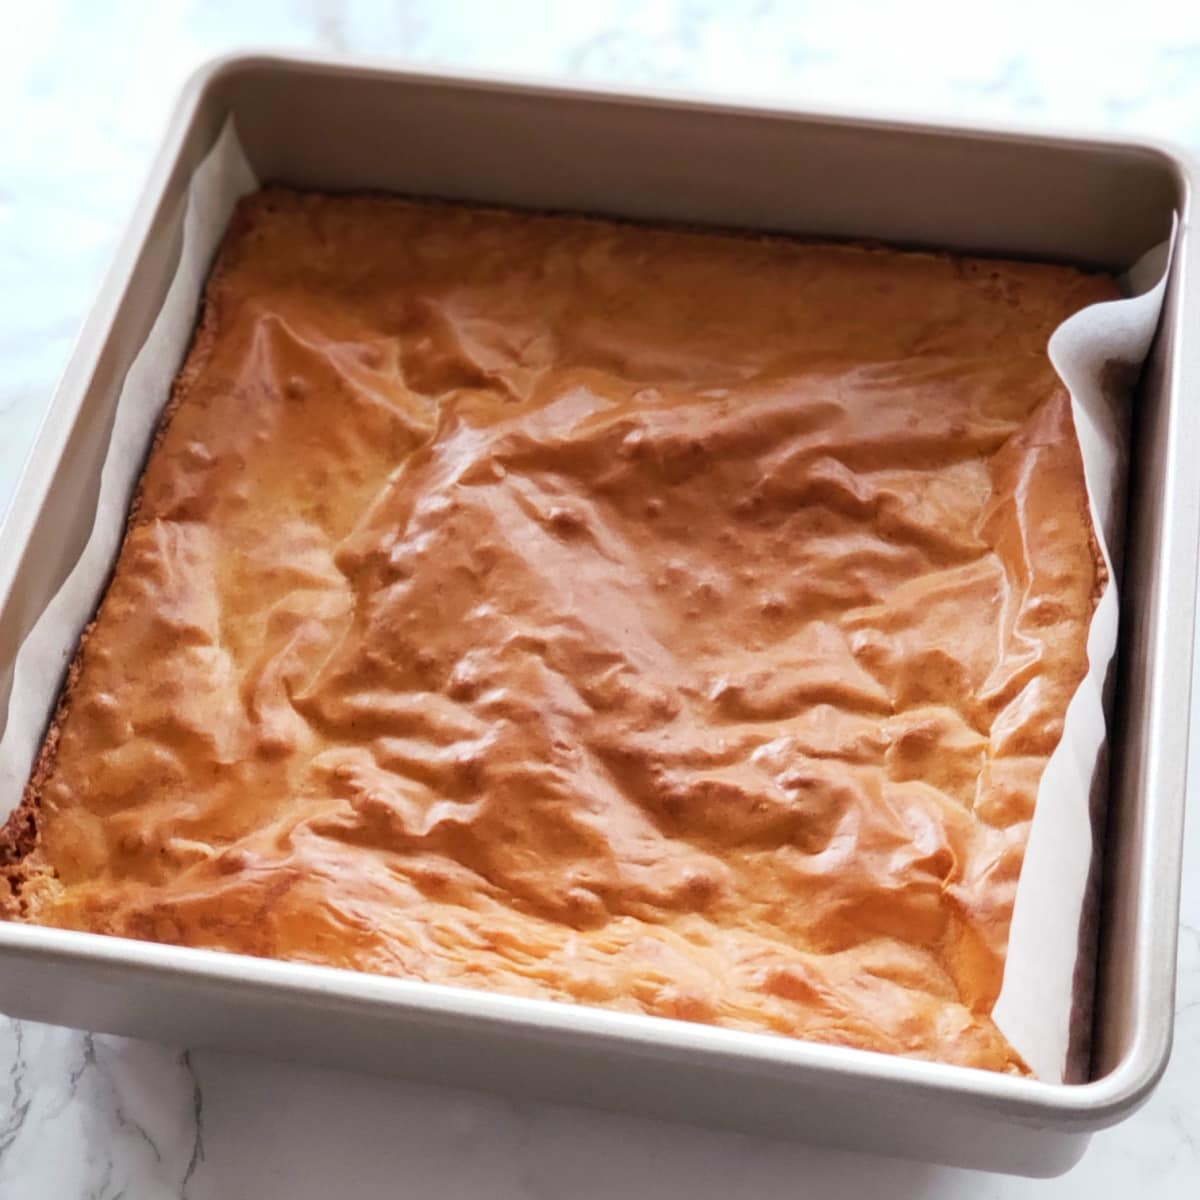 Blondies with a light brown rough surface are in a parchment-lined pan on a white marble counter